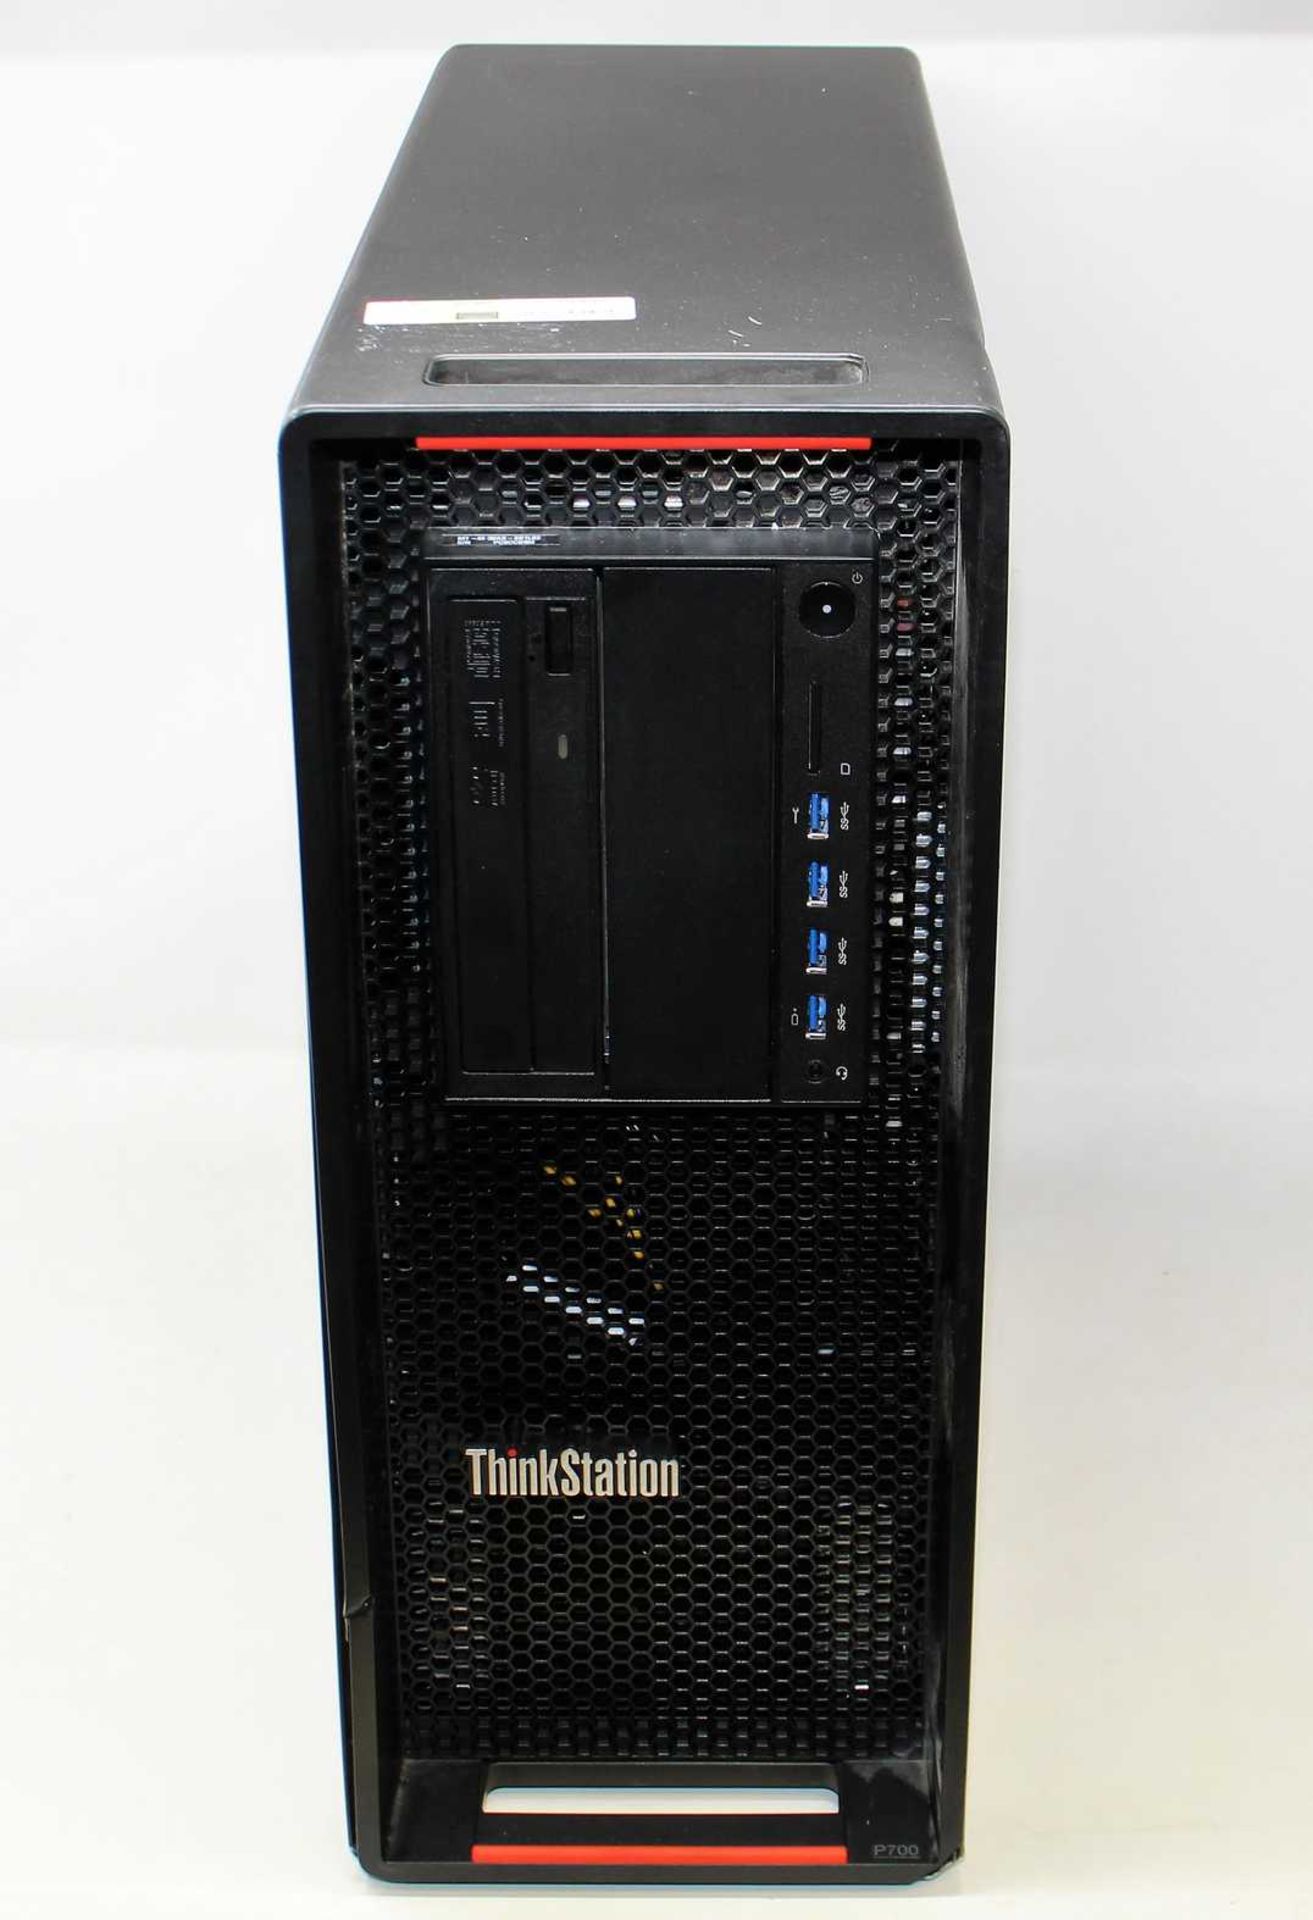 COLLECTION ONLY: A pre-owned Lenovo ThinkStation P700 Tower PC with Intel Xeon E5-2637 v3 3.50GHz (2